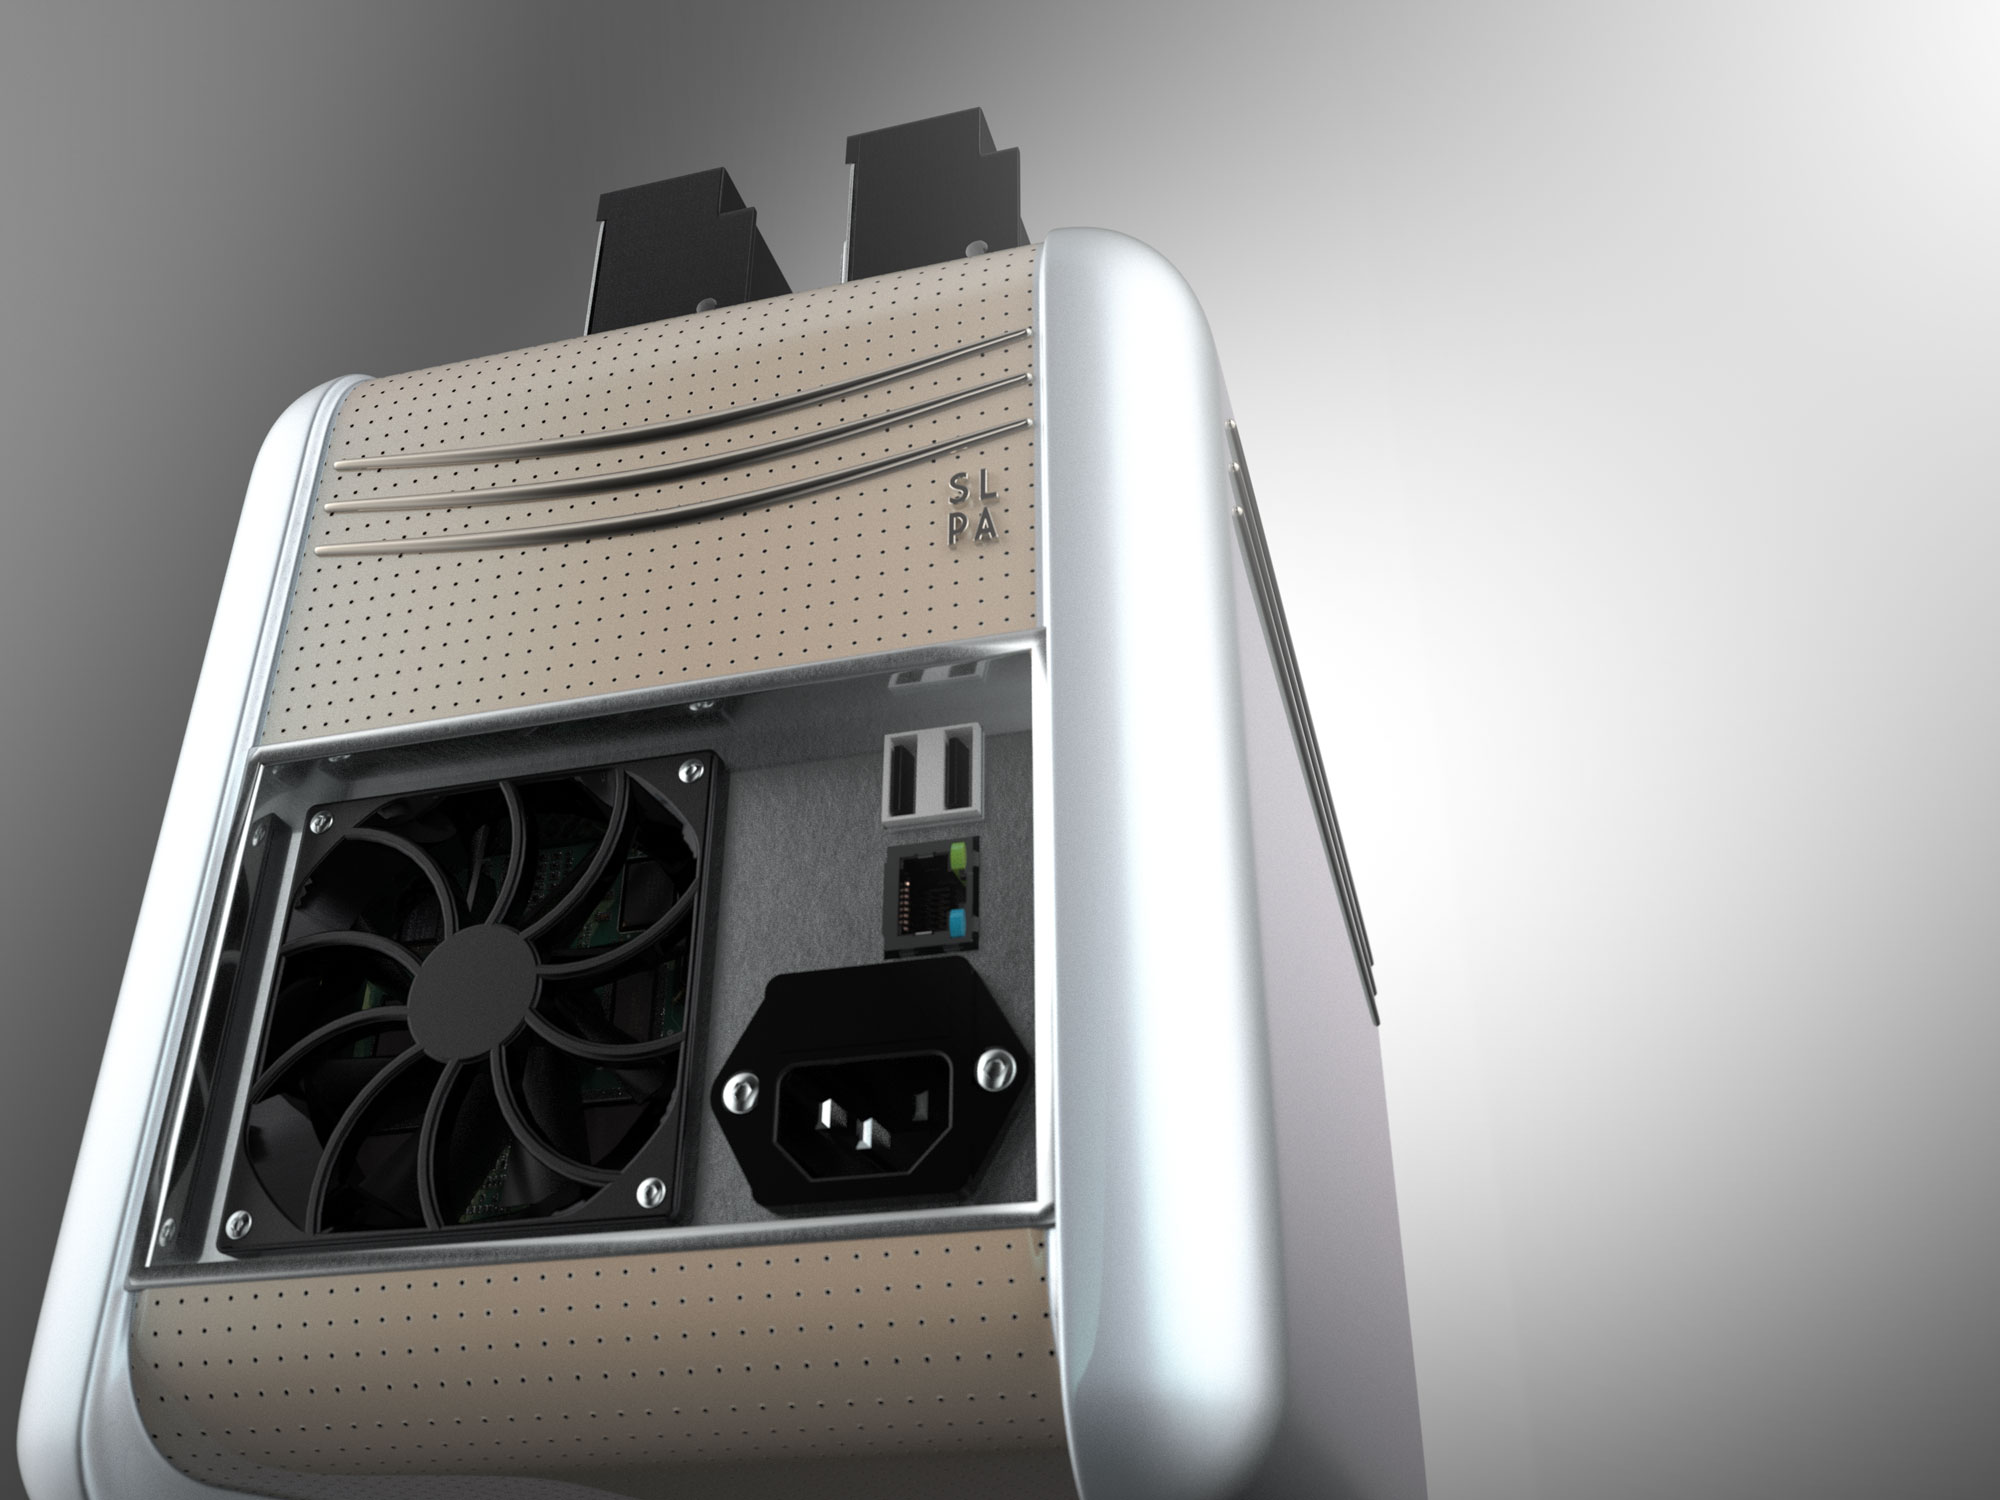 A NAS in a 50's Toaster Design back